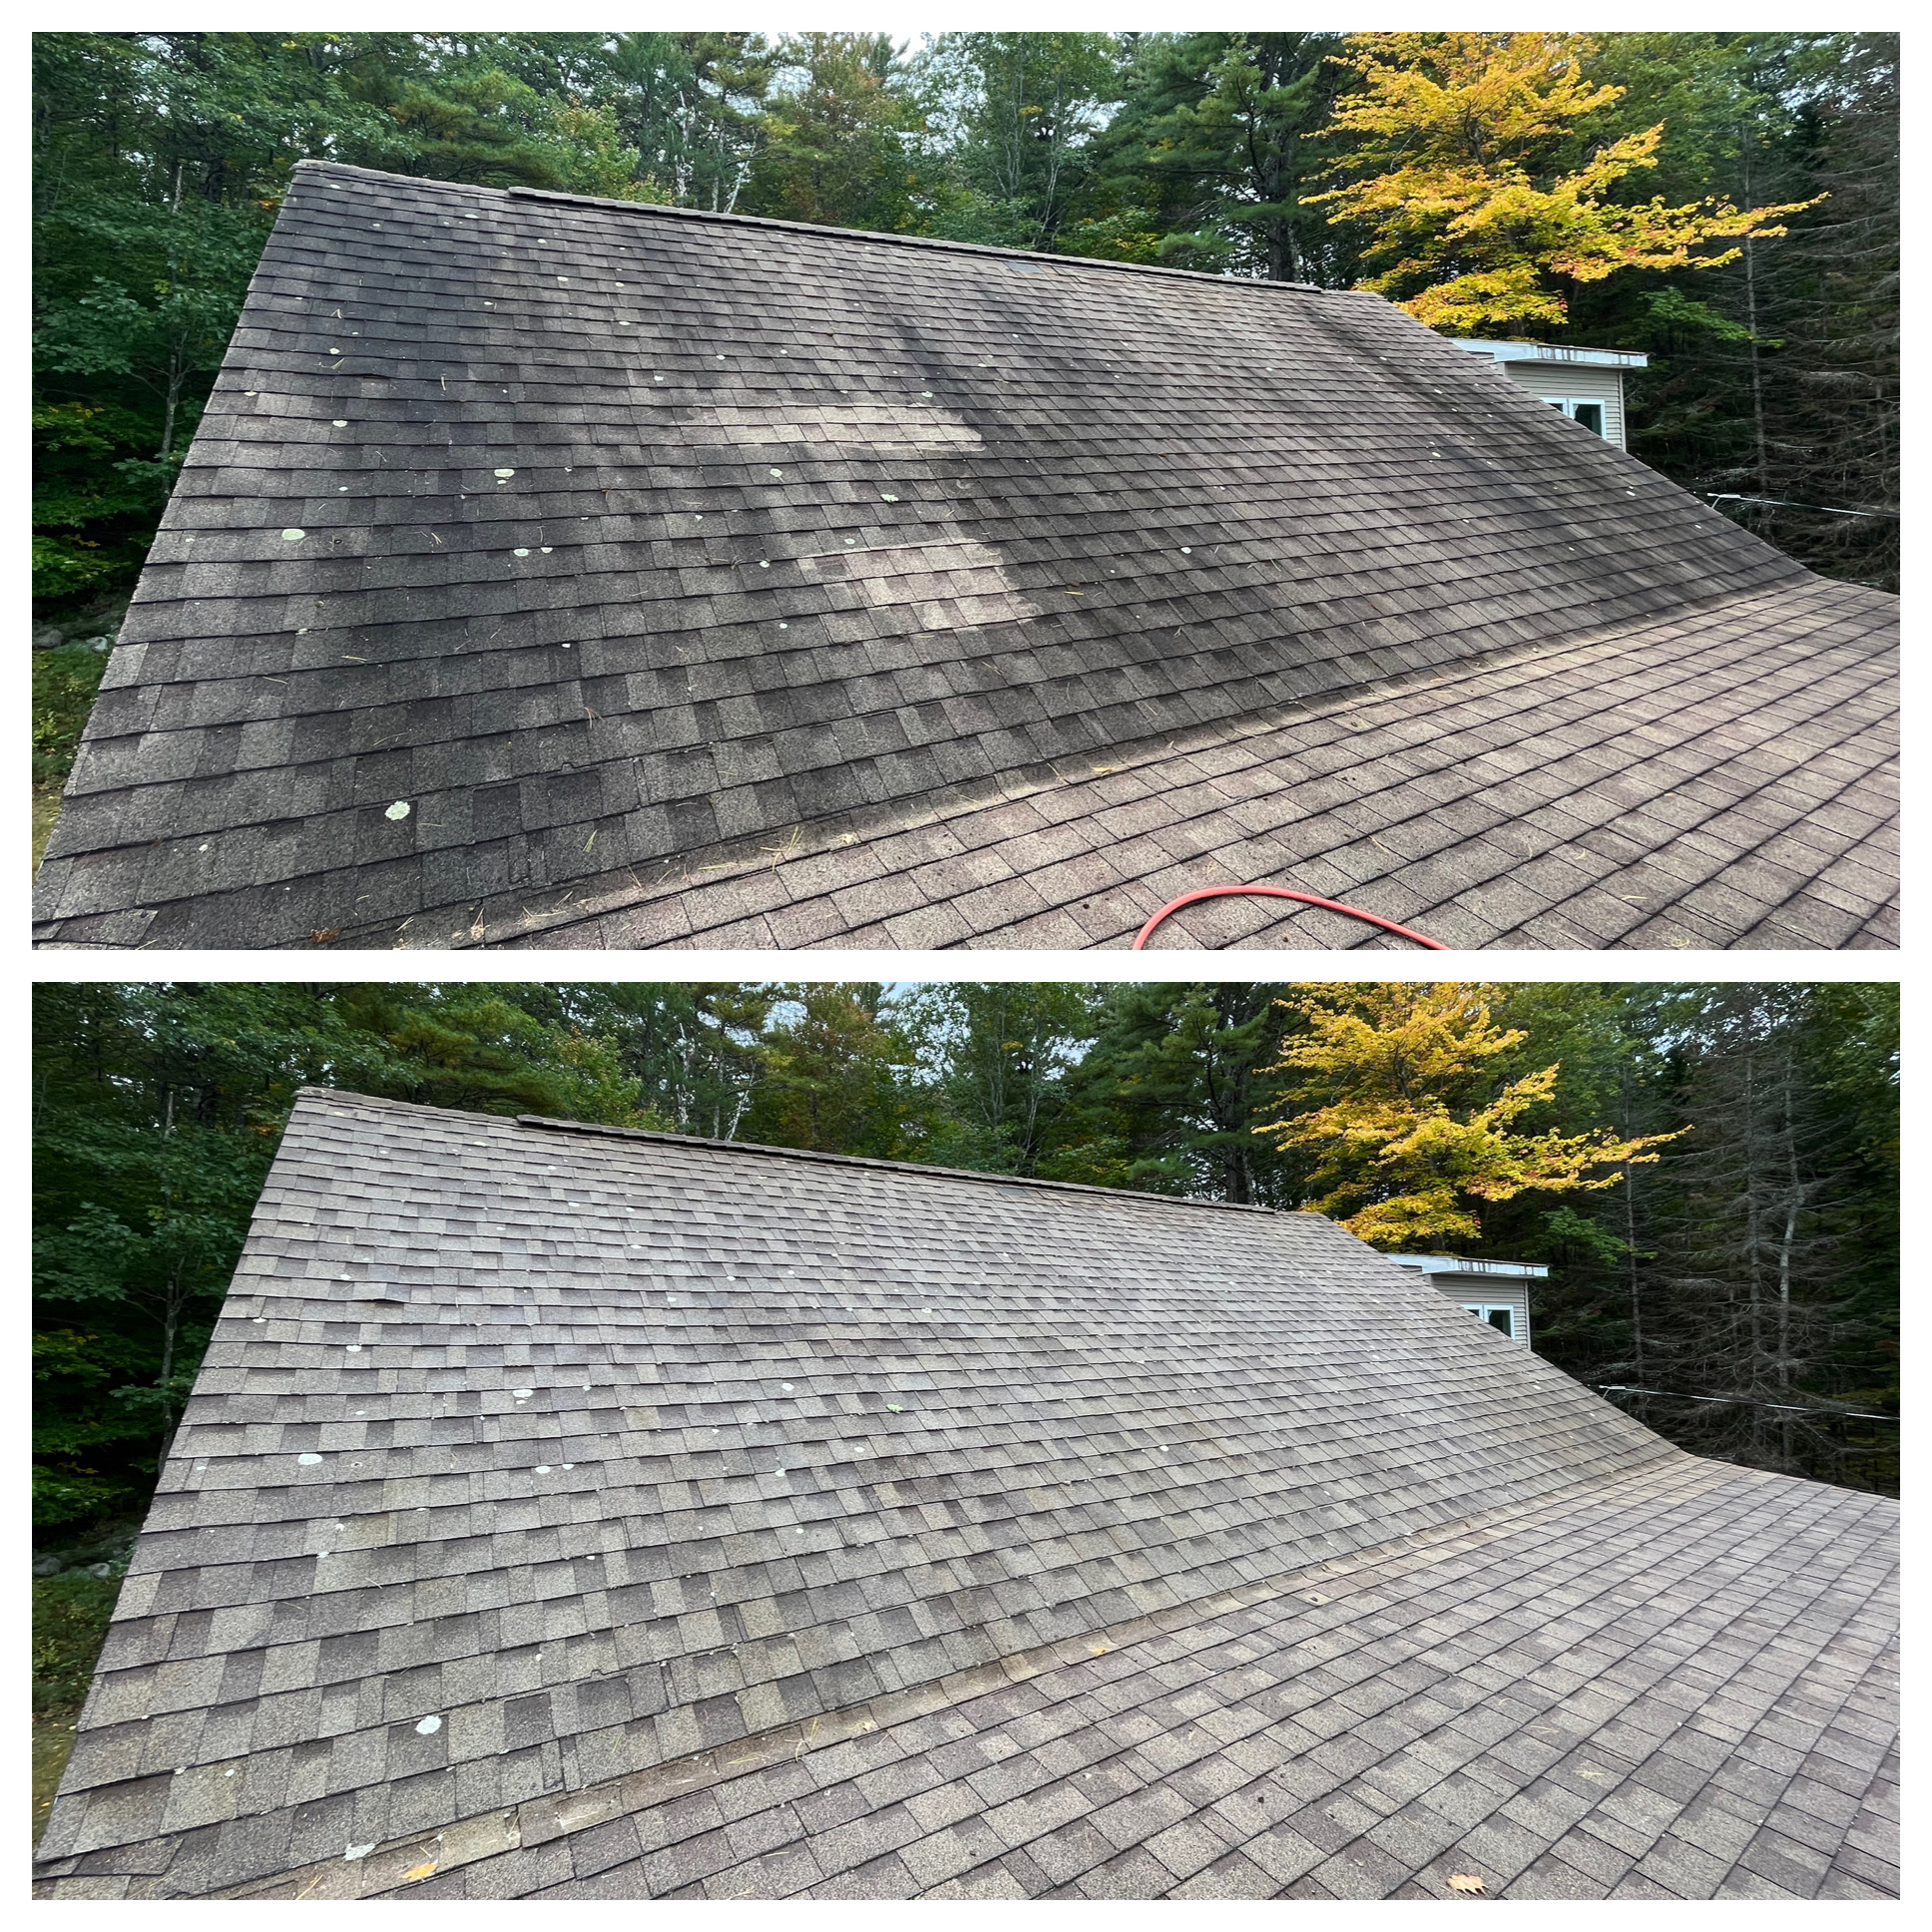 Homeowner Fail: Professional Roof Cleaning in Wolfeboro 